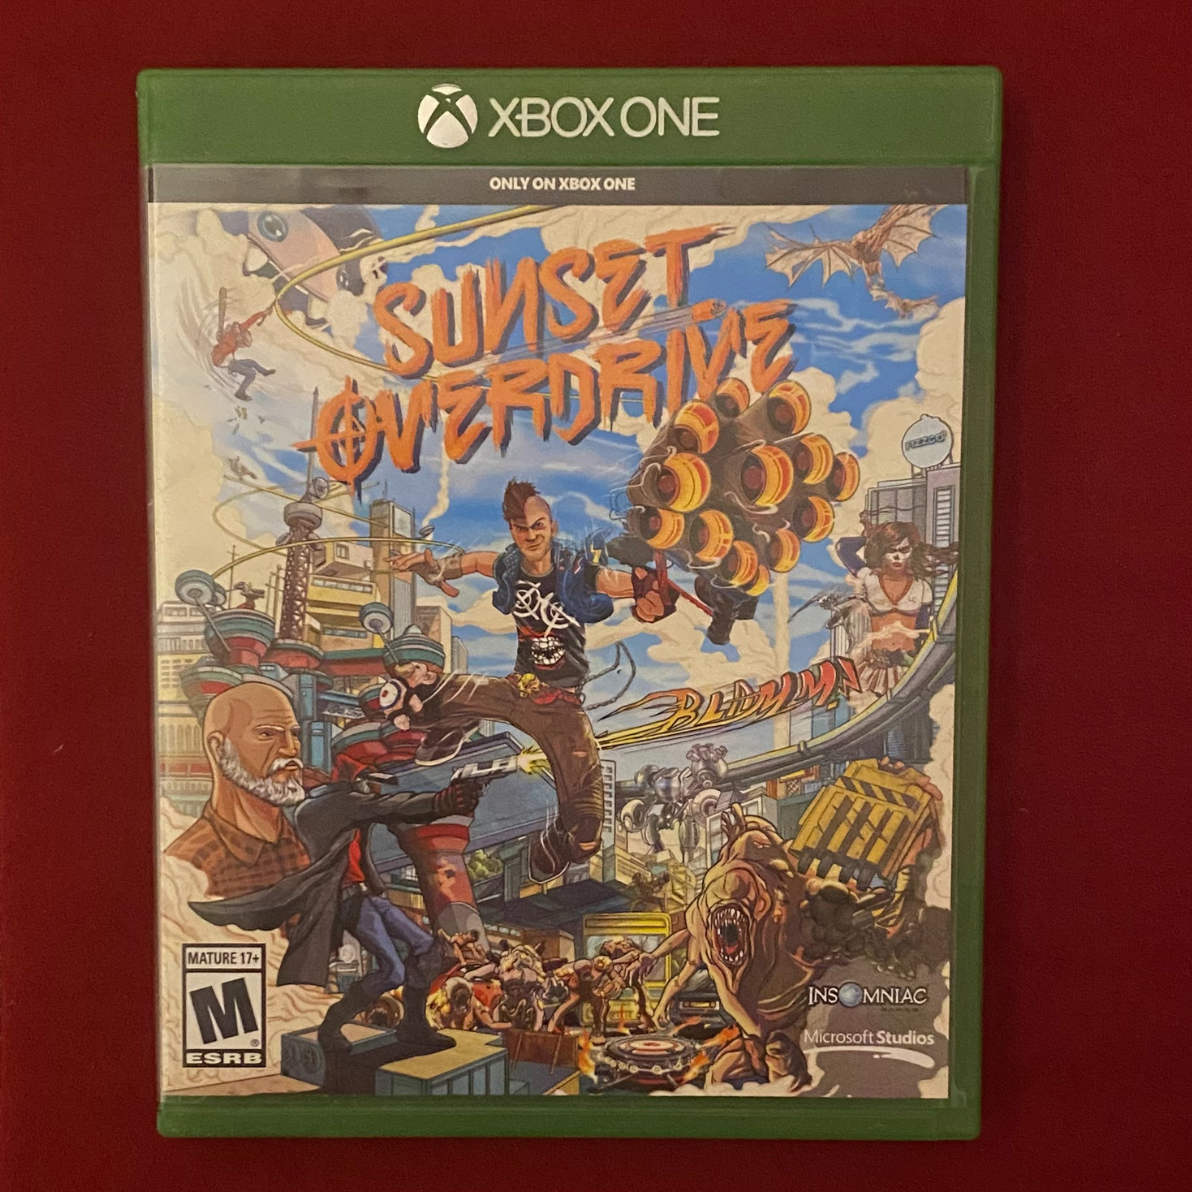 Is Sunset Overdrive Any Good?